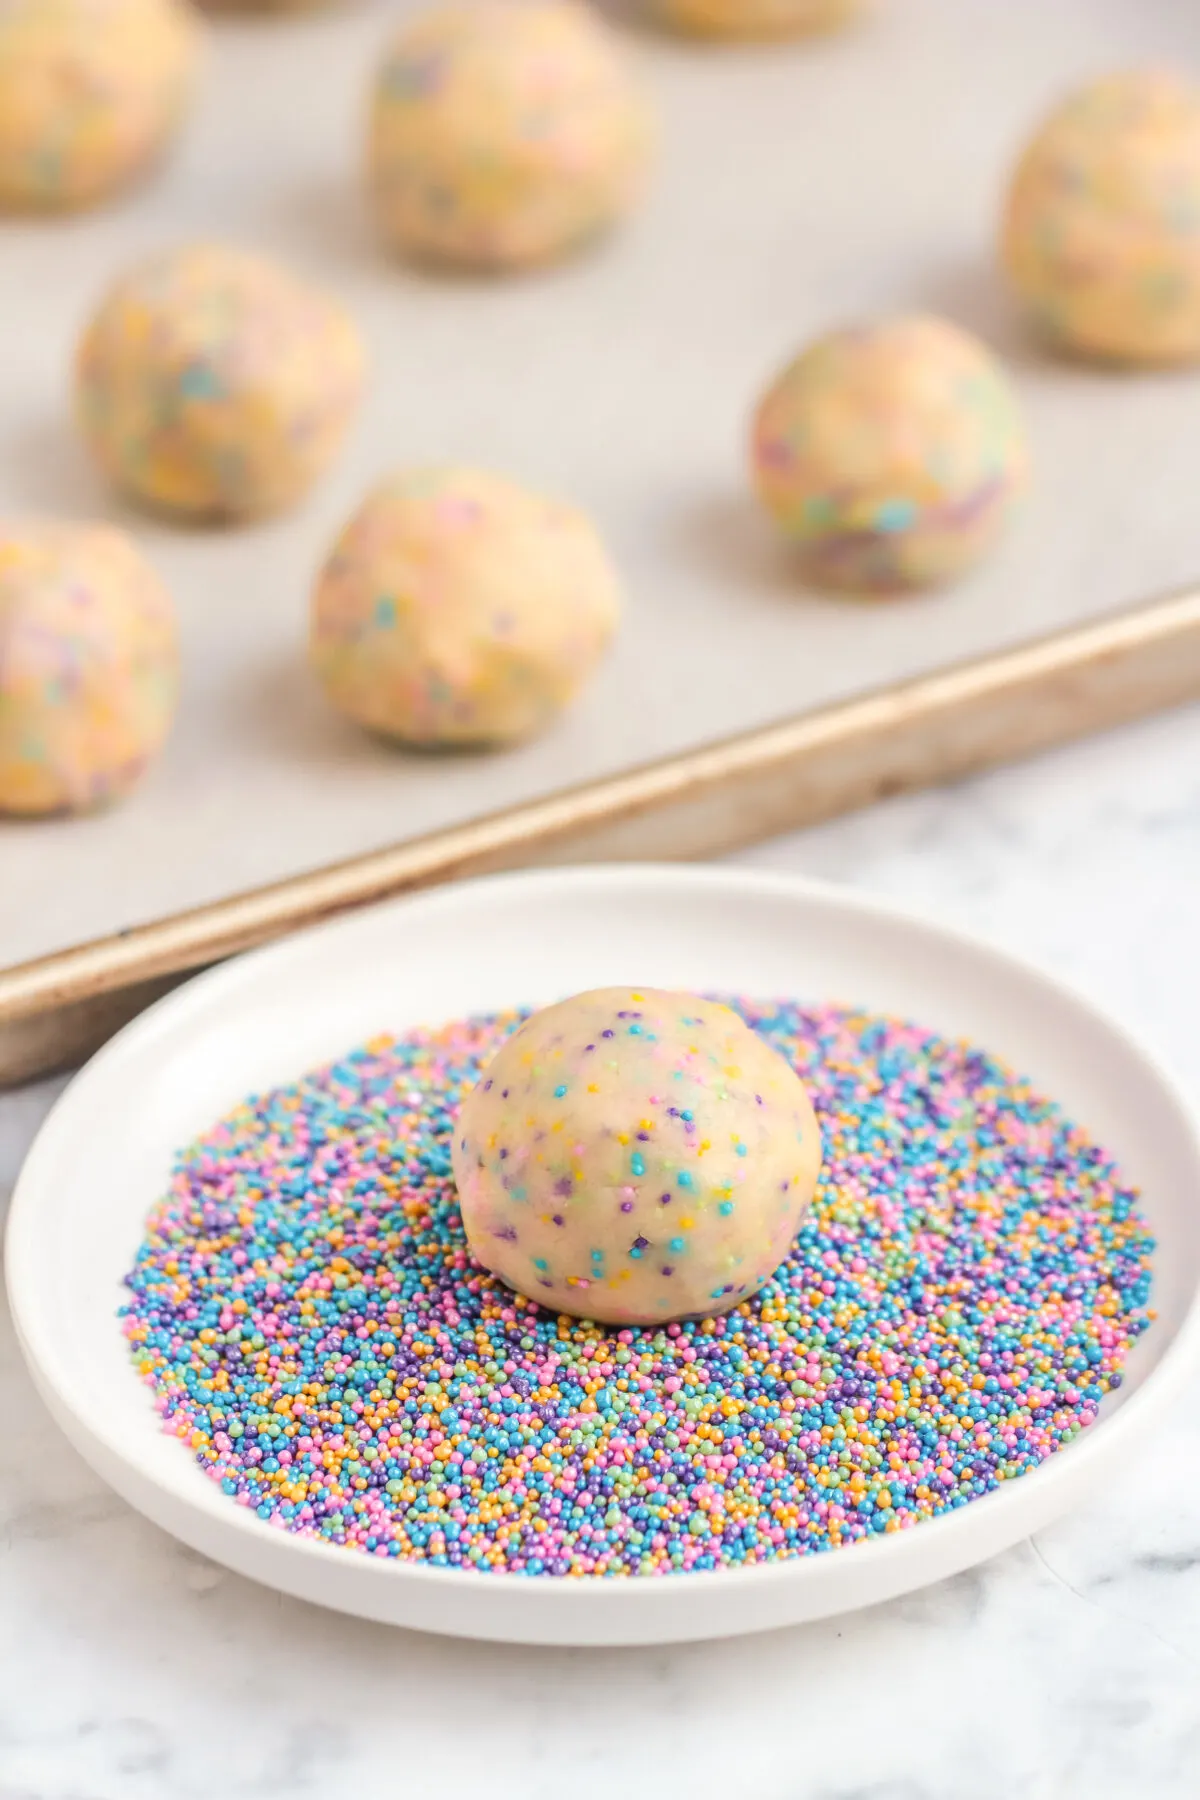 Rolling the dough balls in sprinkles.